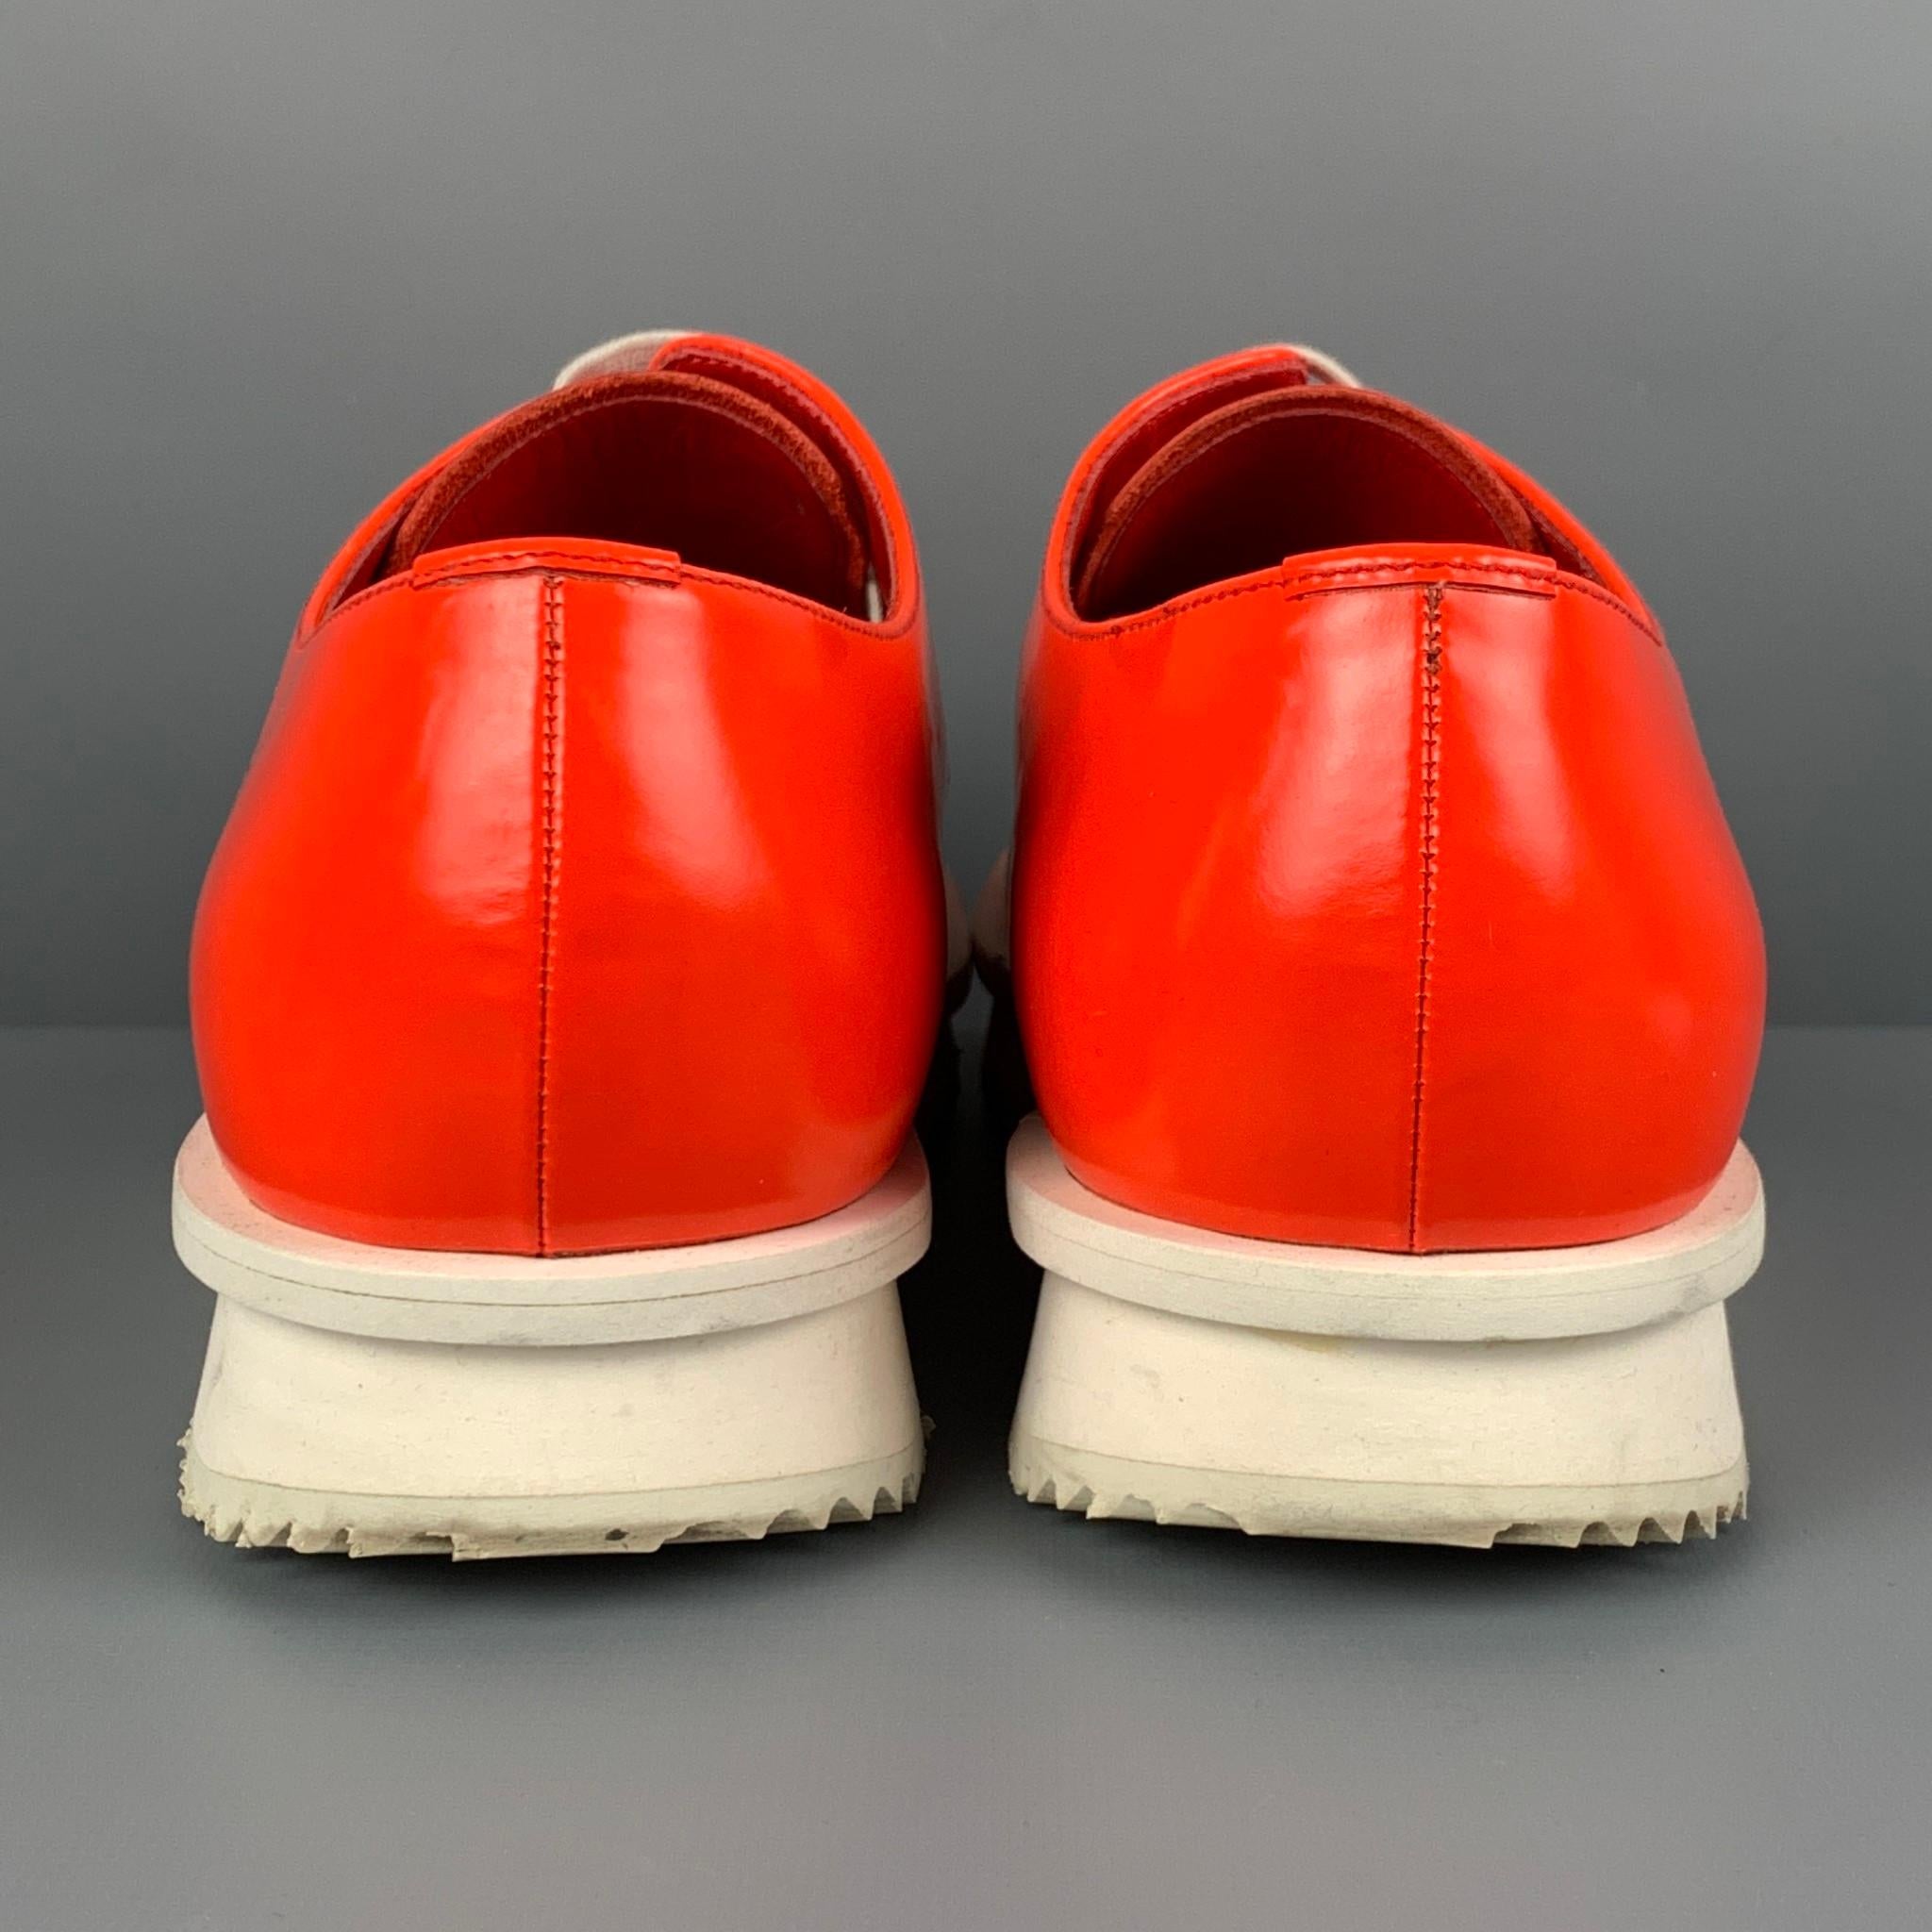 red and white prada shoes